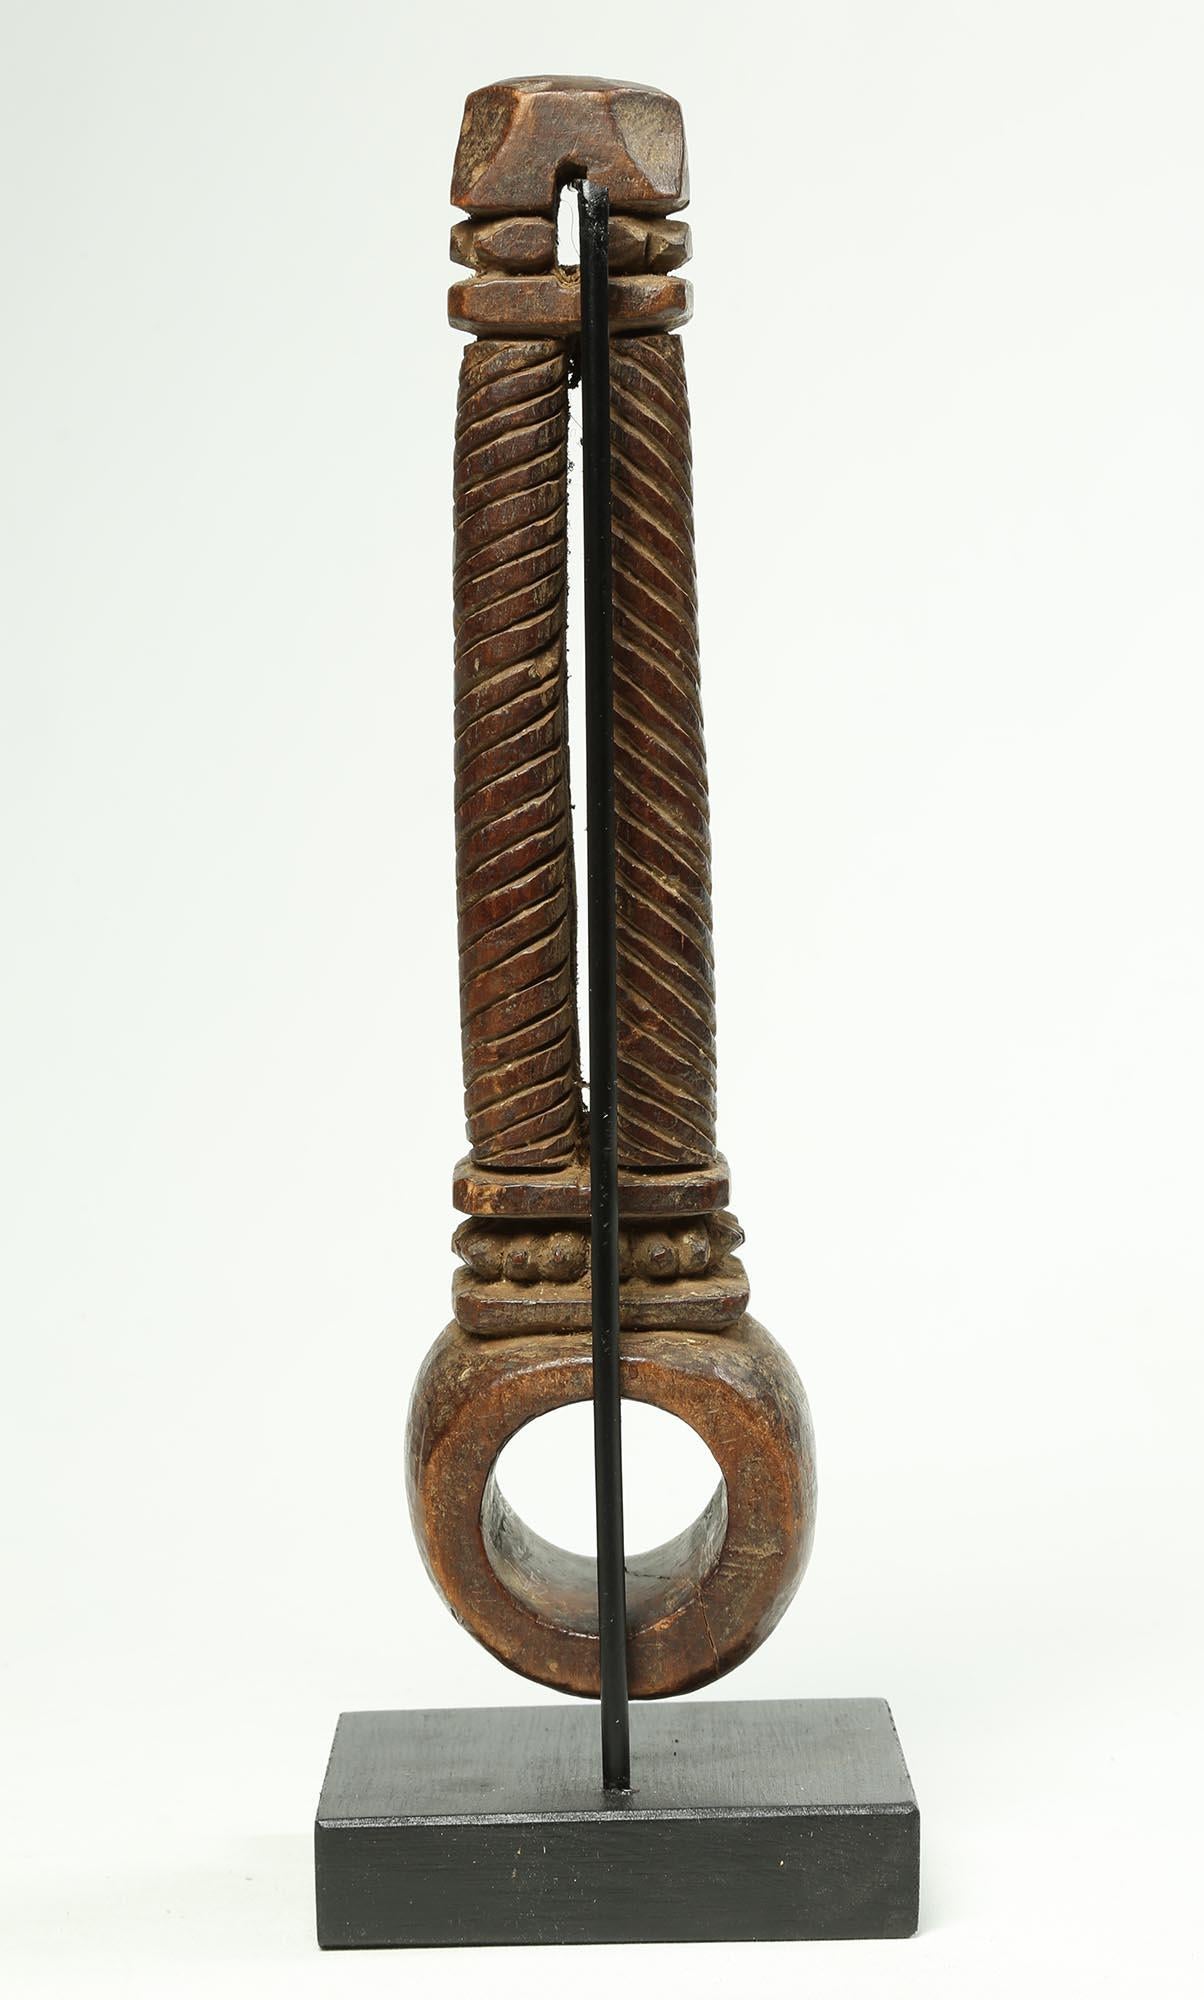 Hand-Carved Nepal Himalayan Butter Churn Handle, Early 20th Century with Columns